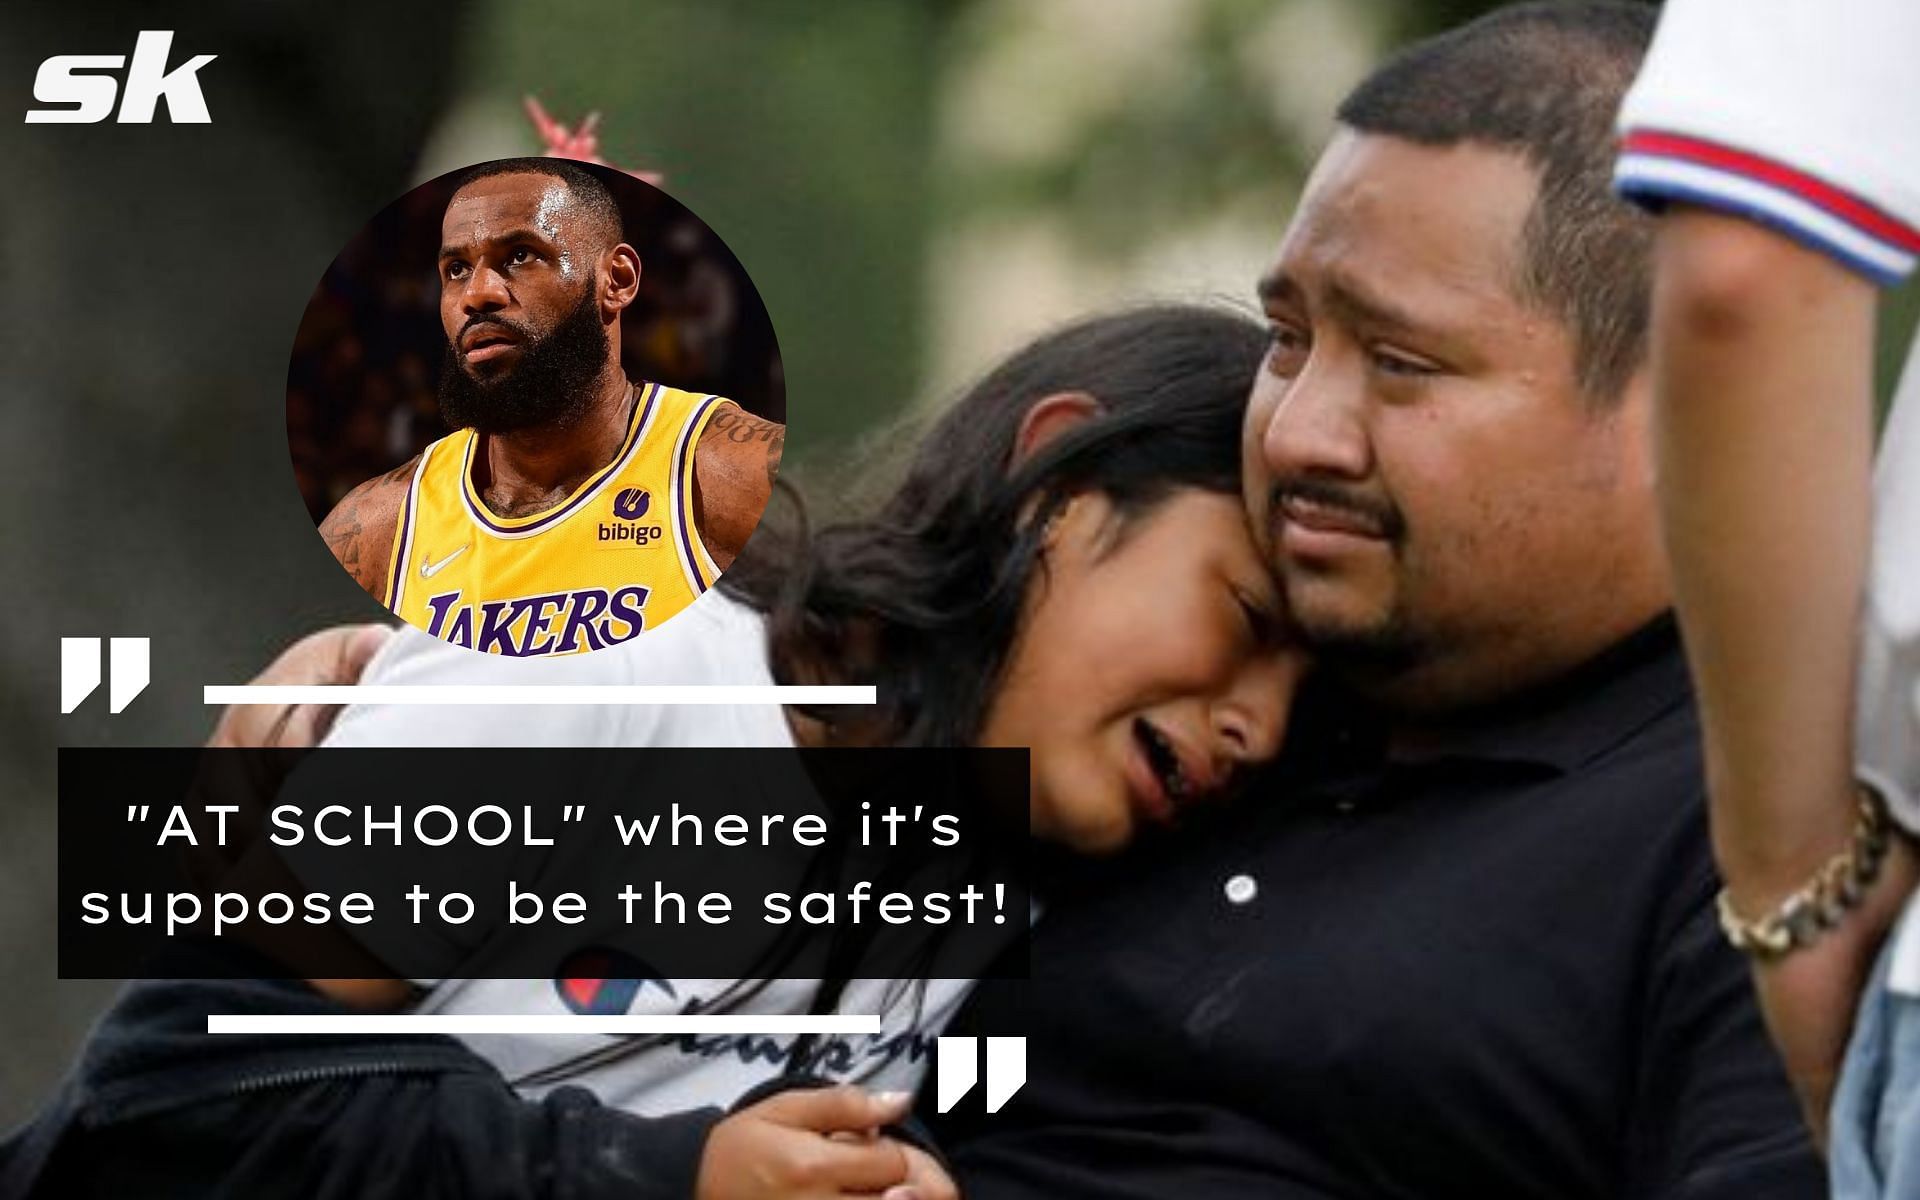 LeBron James was outraged by the senseless killing at a Texas school.